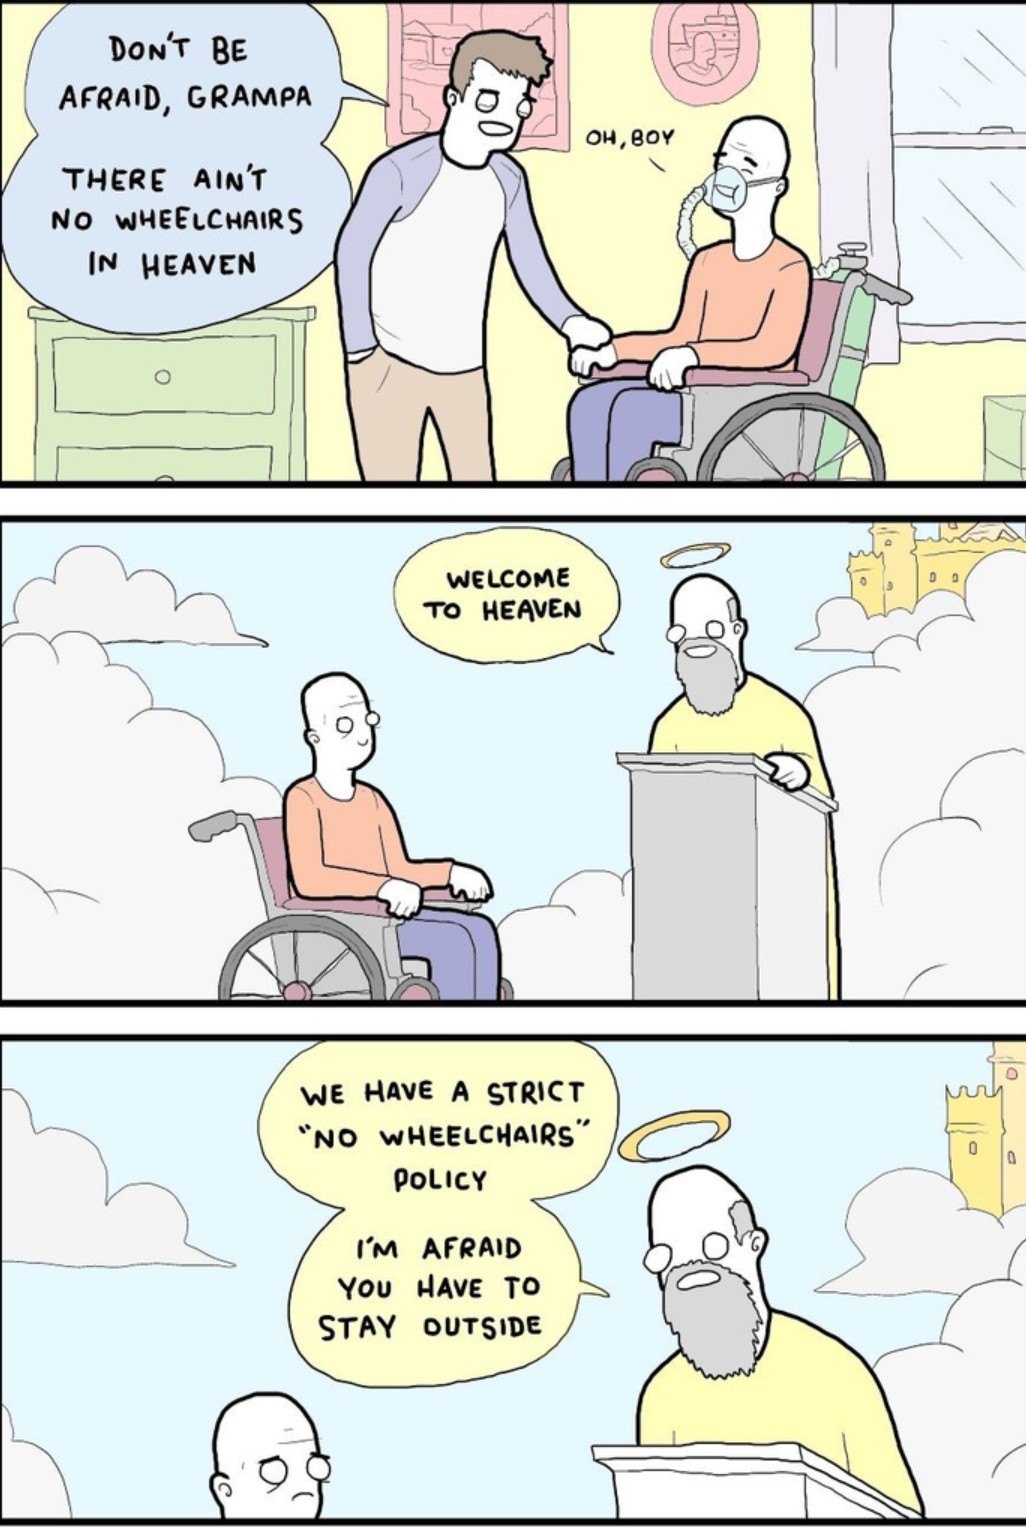 There'll be no wheelchairs in heaven. - meme